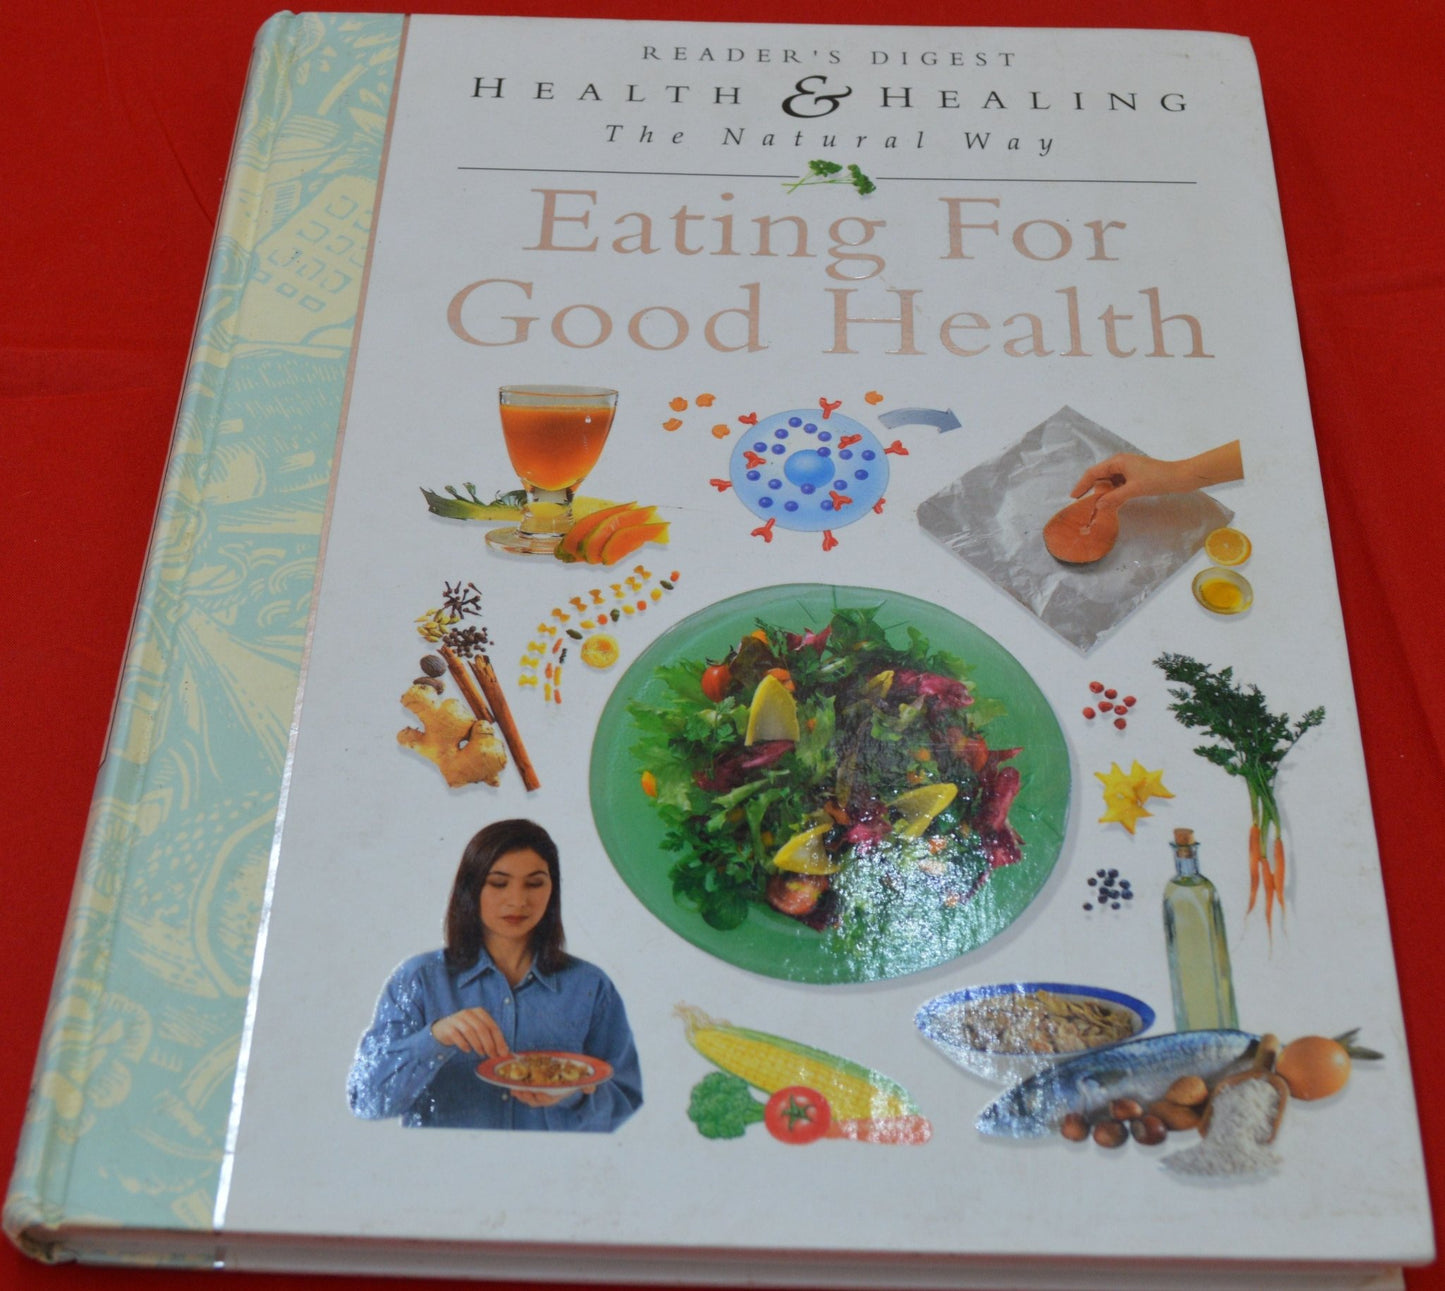 SECONDHAND BOOK READER’S DIGEST EATING FOR GOOD HEALTH GOOD CONDITION - TMD167207